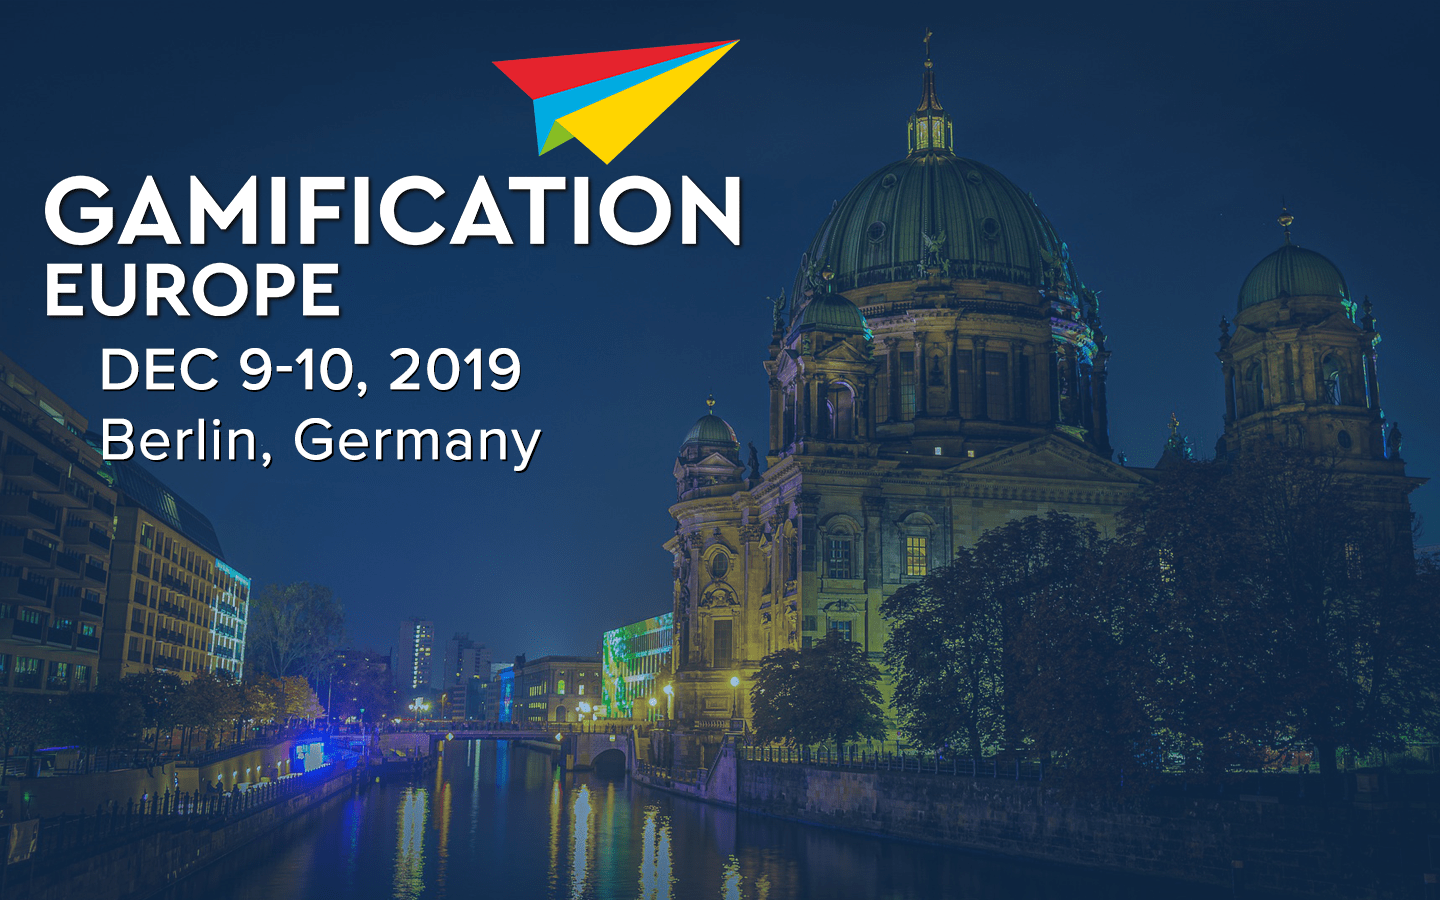 Reflections on Gamification Europe Conference 2019